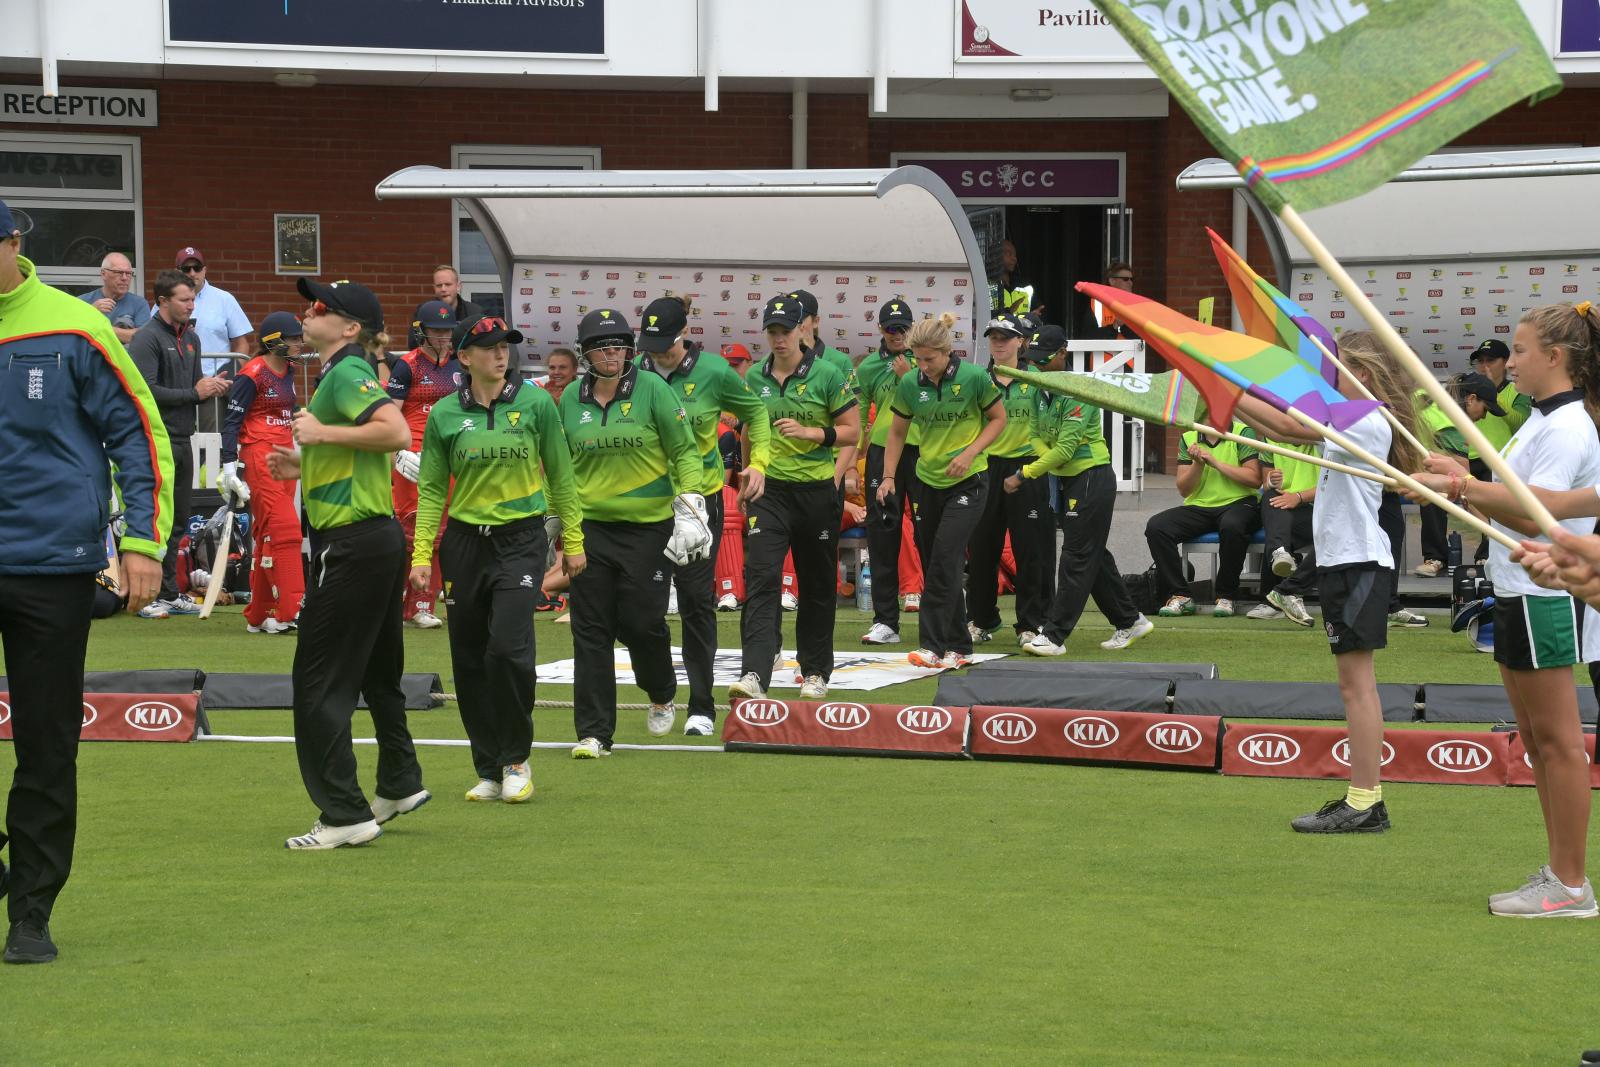 Women & Girlâ€™s cricket is set to be transformed as part of an exciting nation-wide strategy